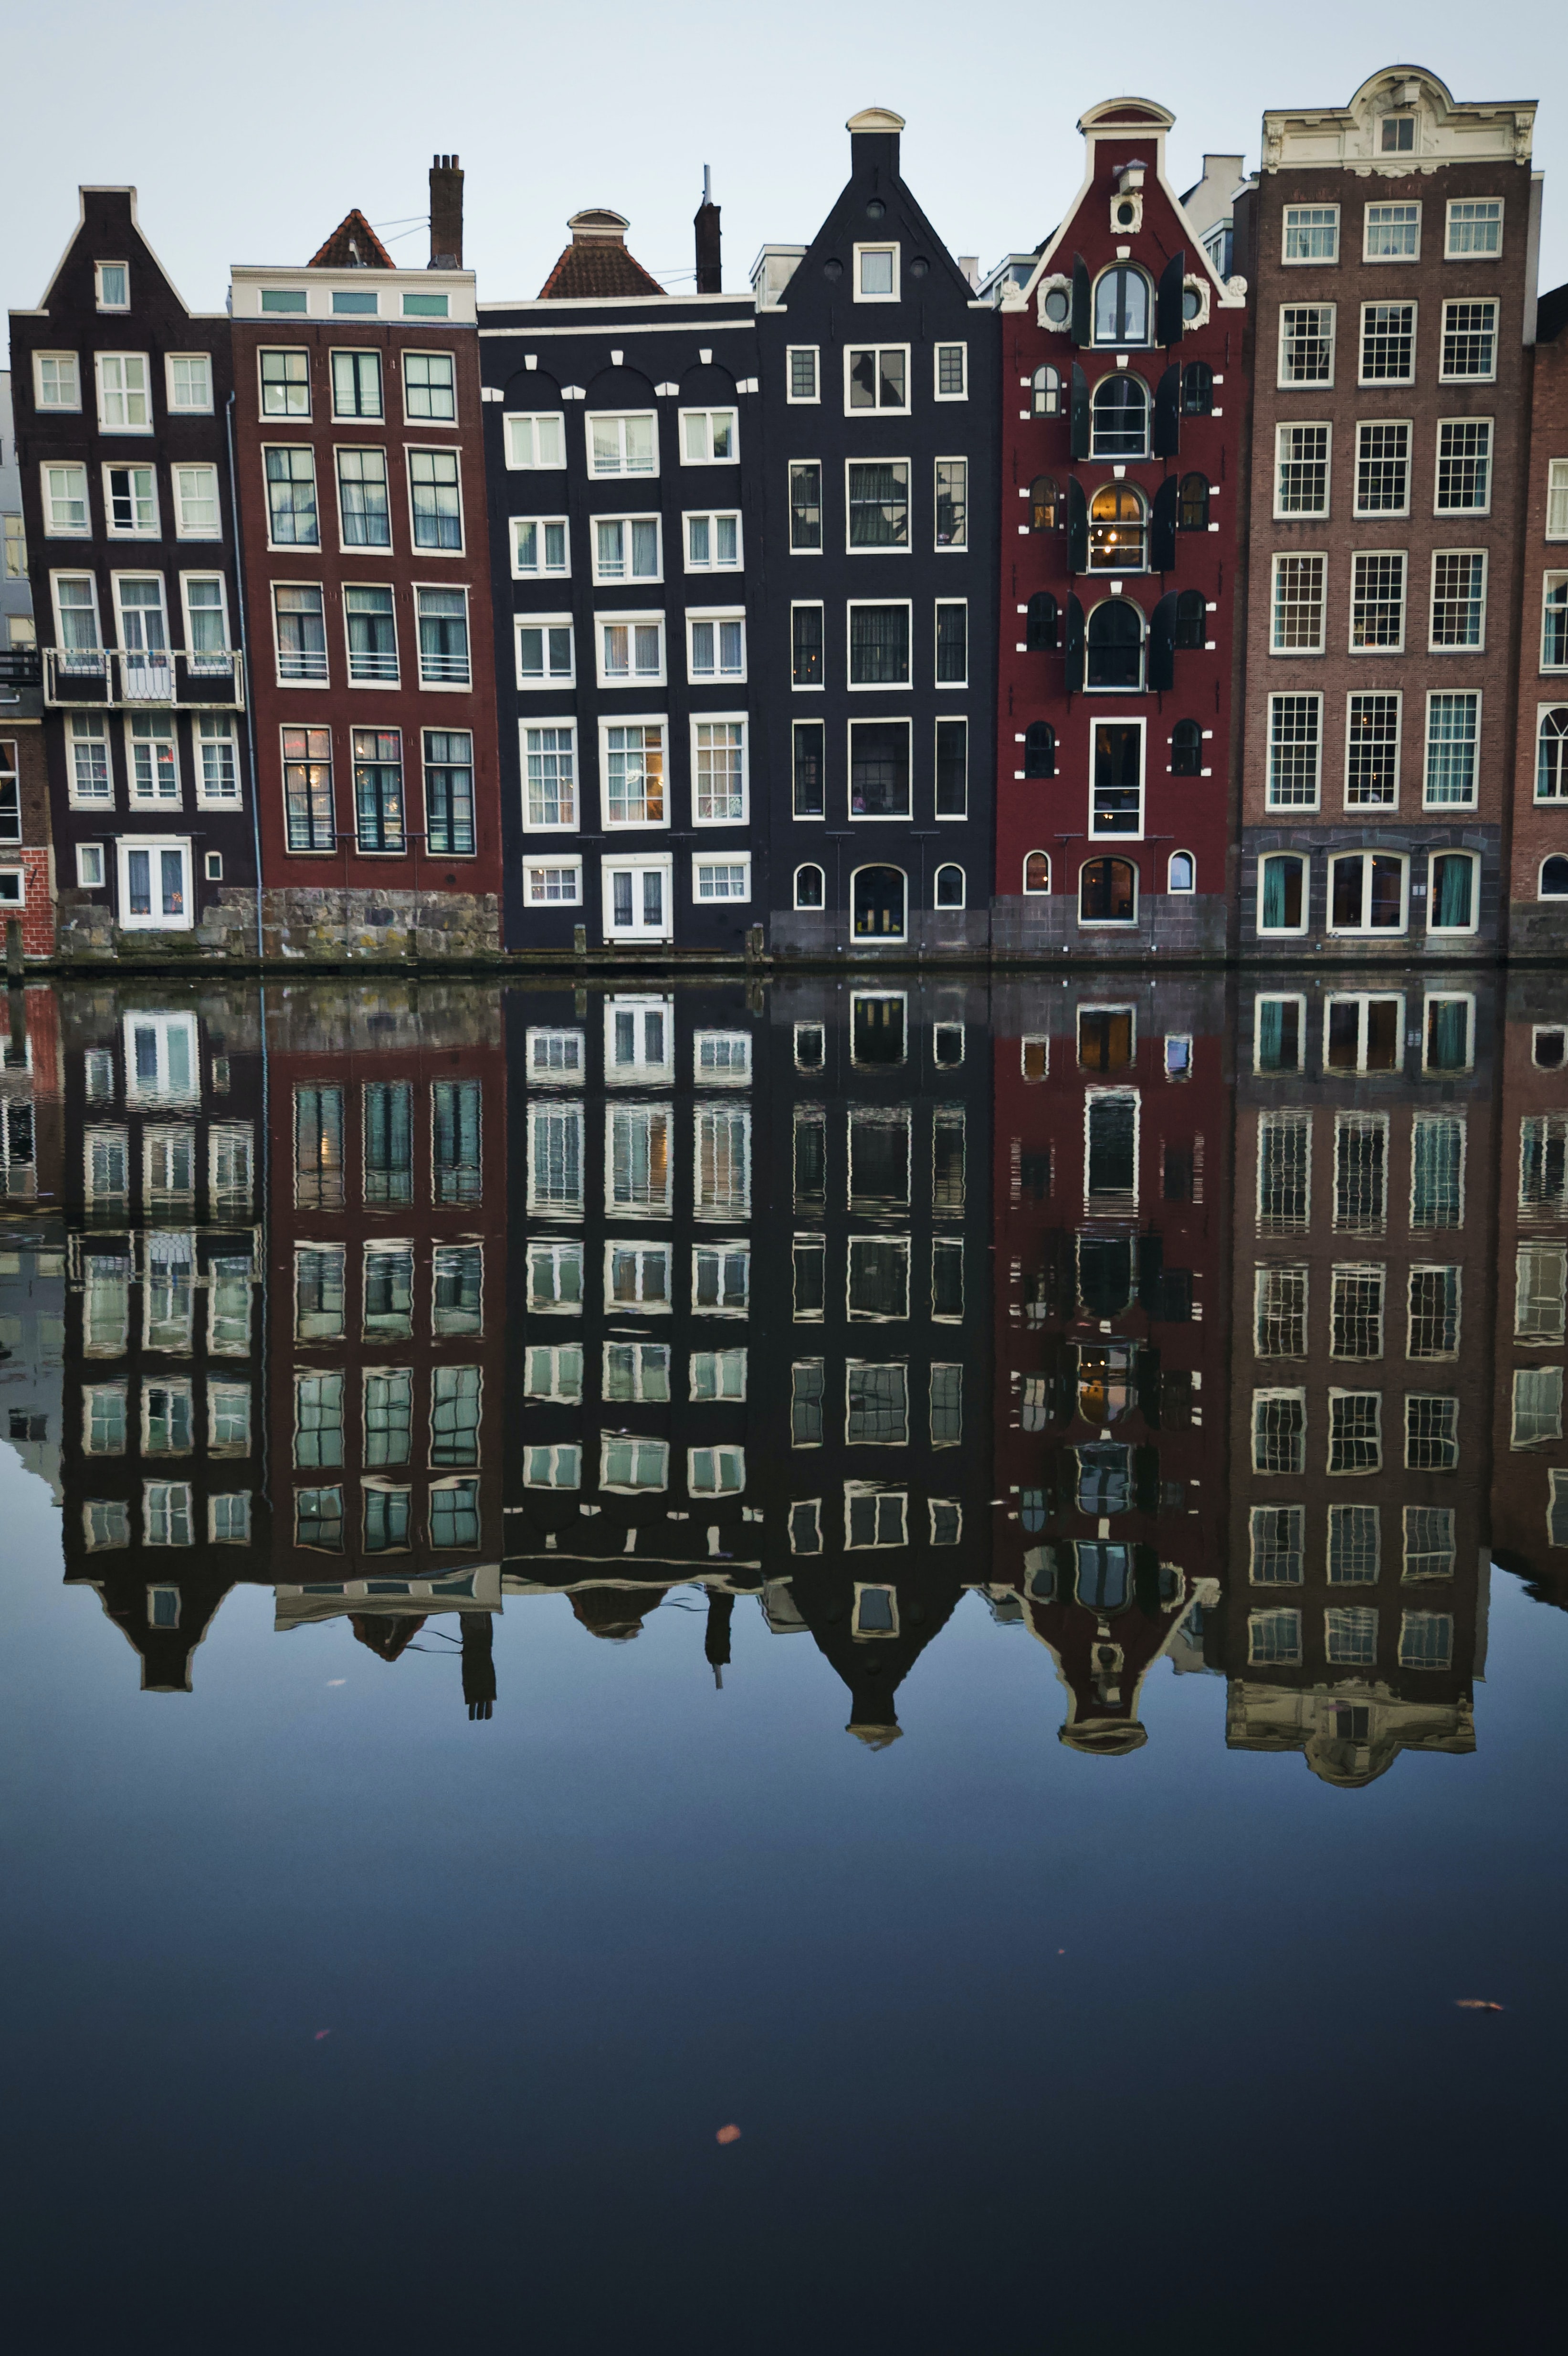 cities, water, houses, architecture, building, reflection